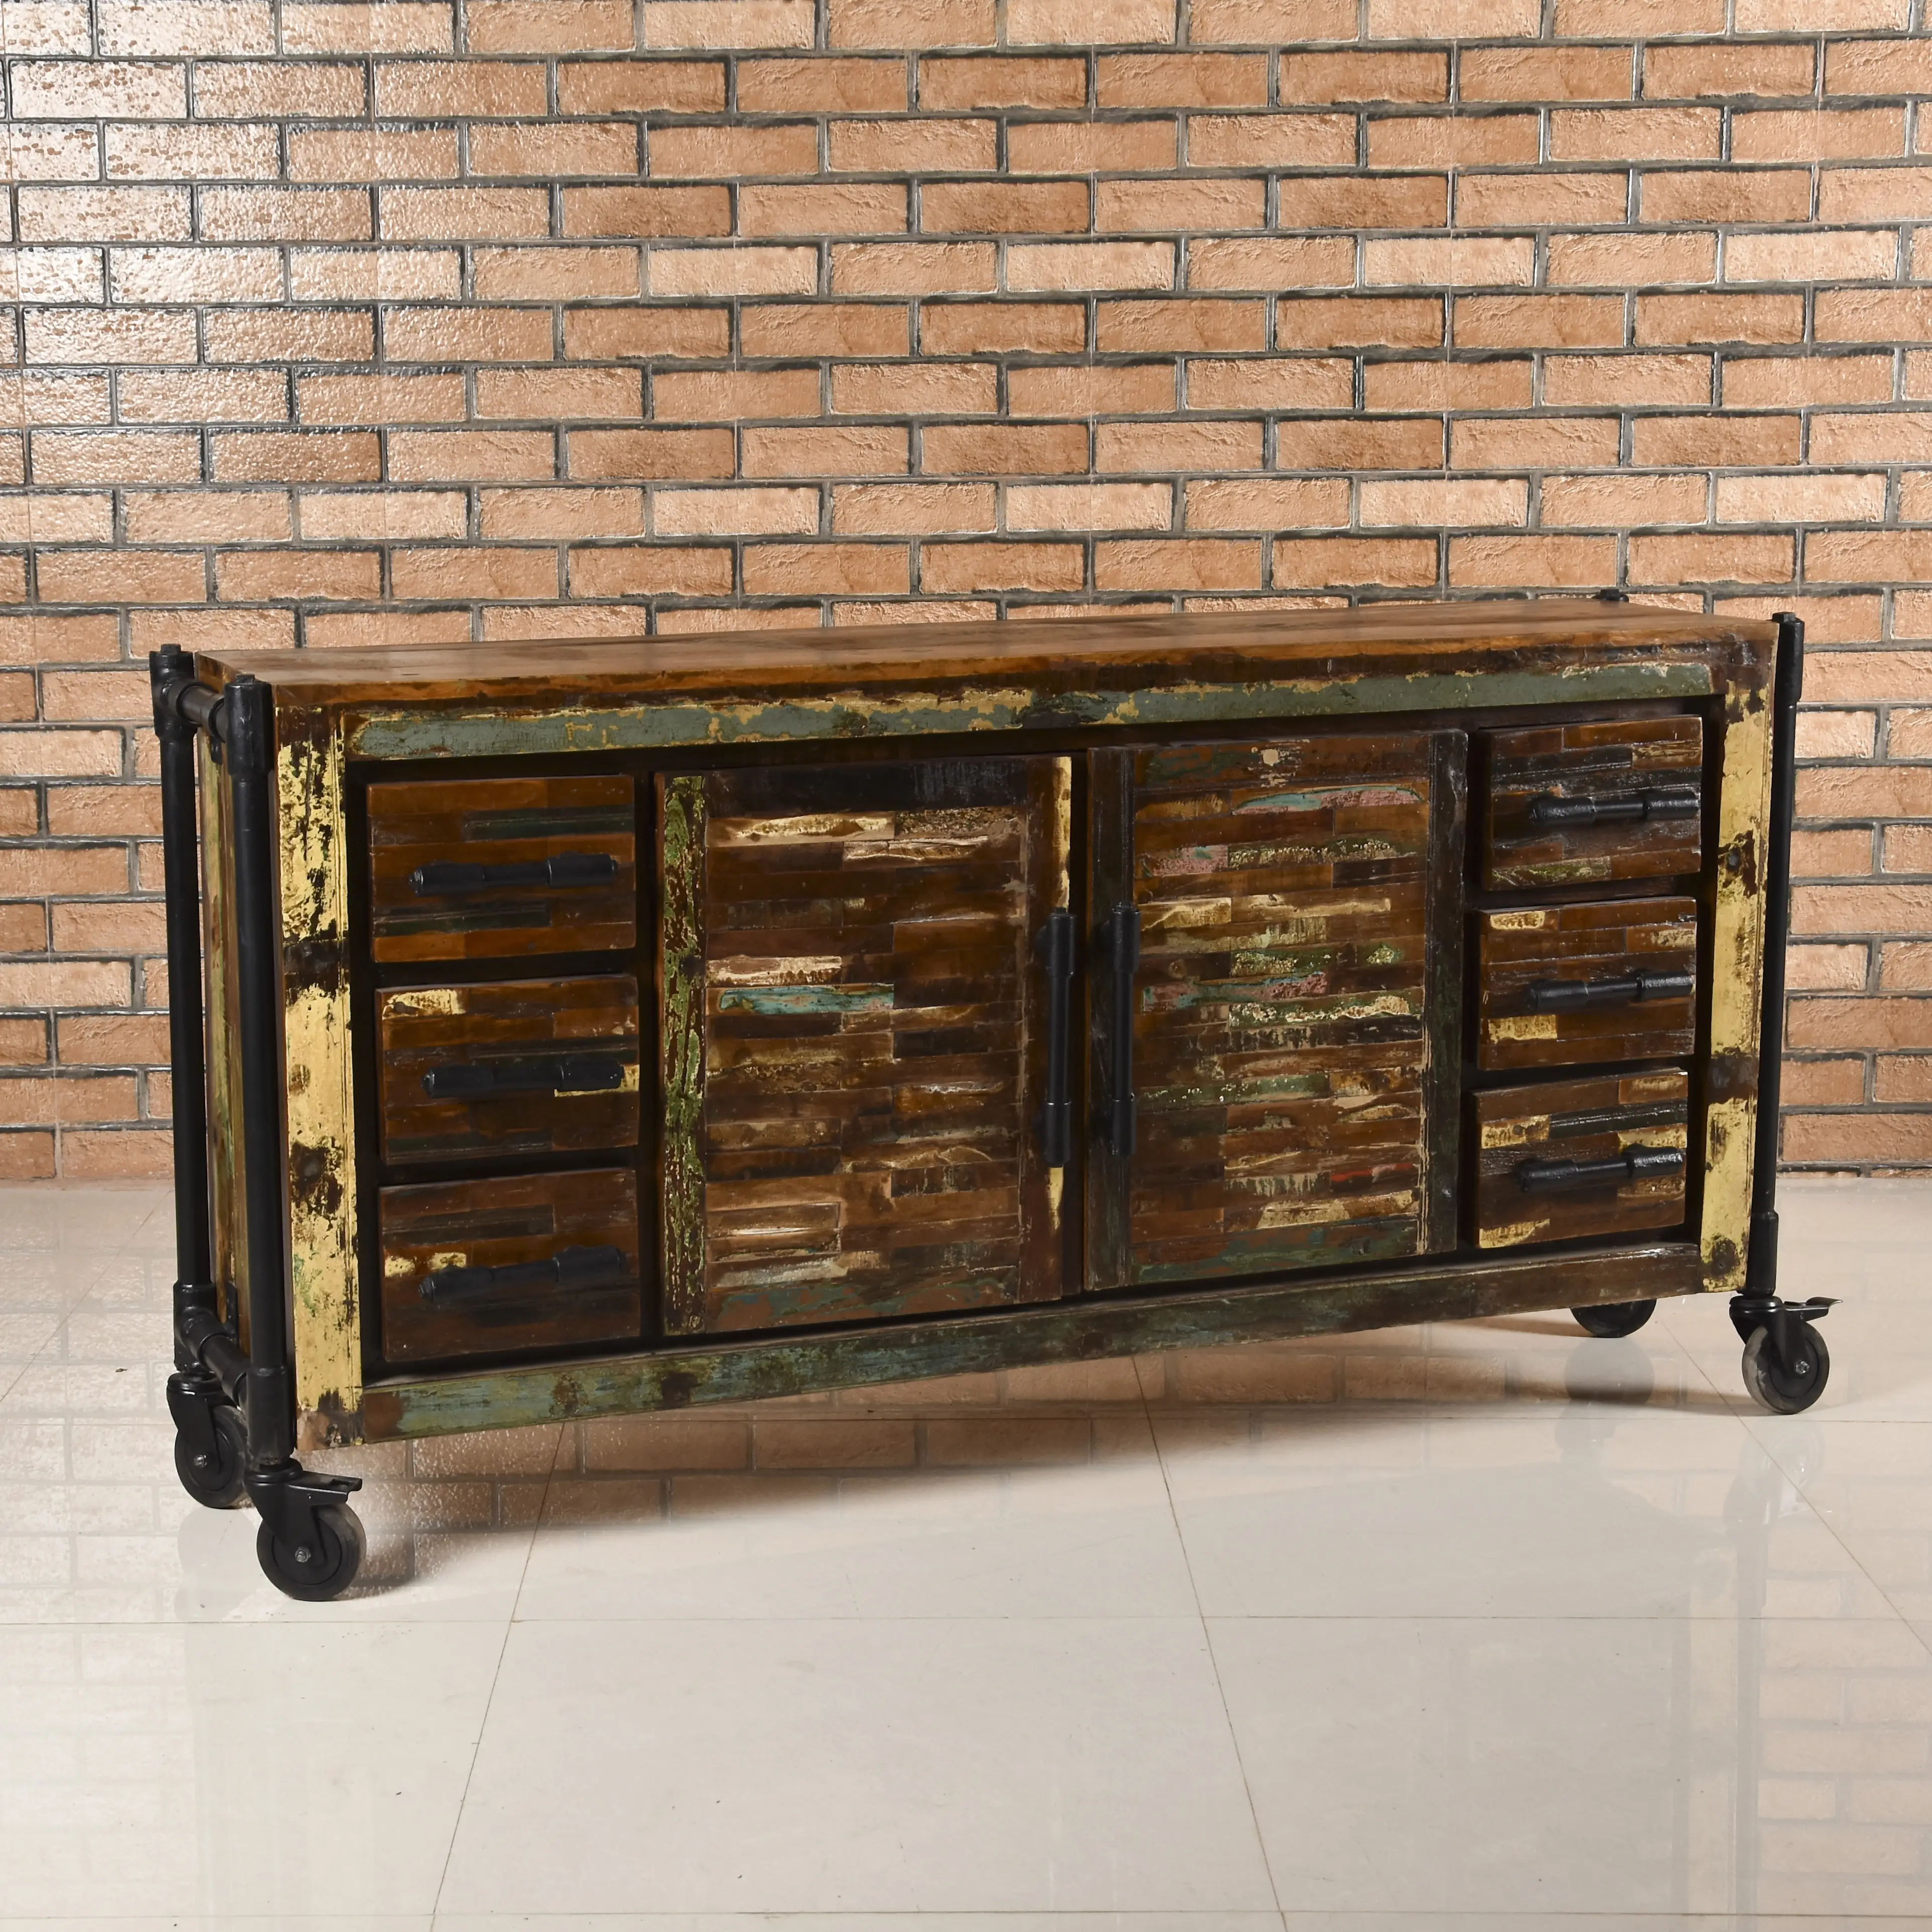 Reclaimed Wood Side Board with 6 Drawers & 2 Doors on Rollers - popular handicrafts